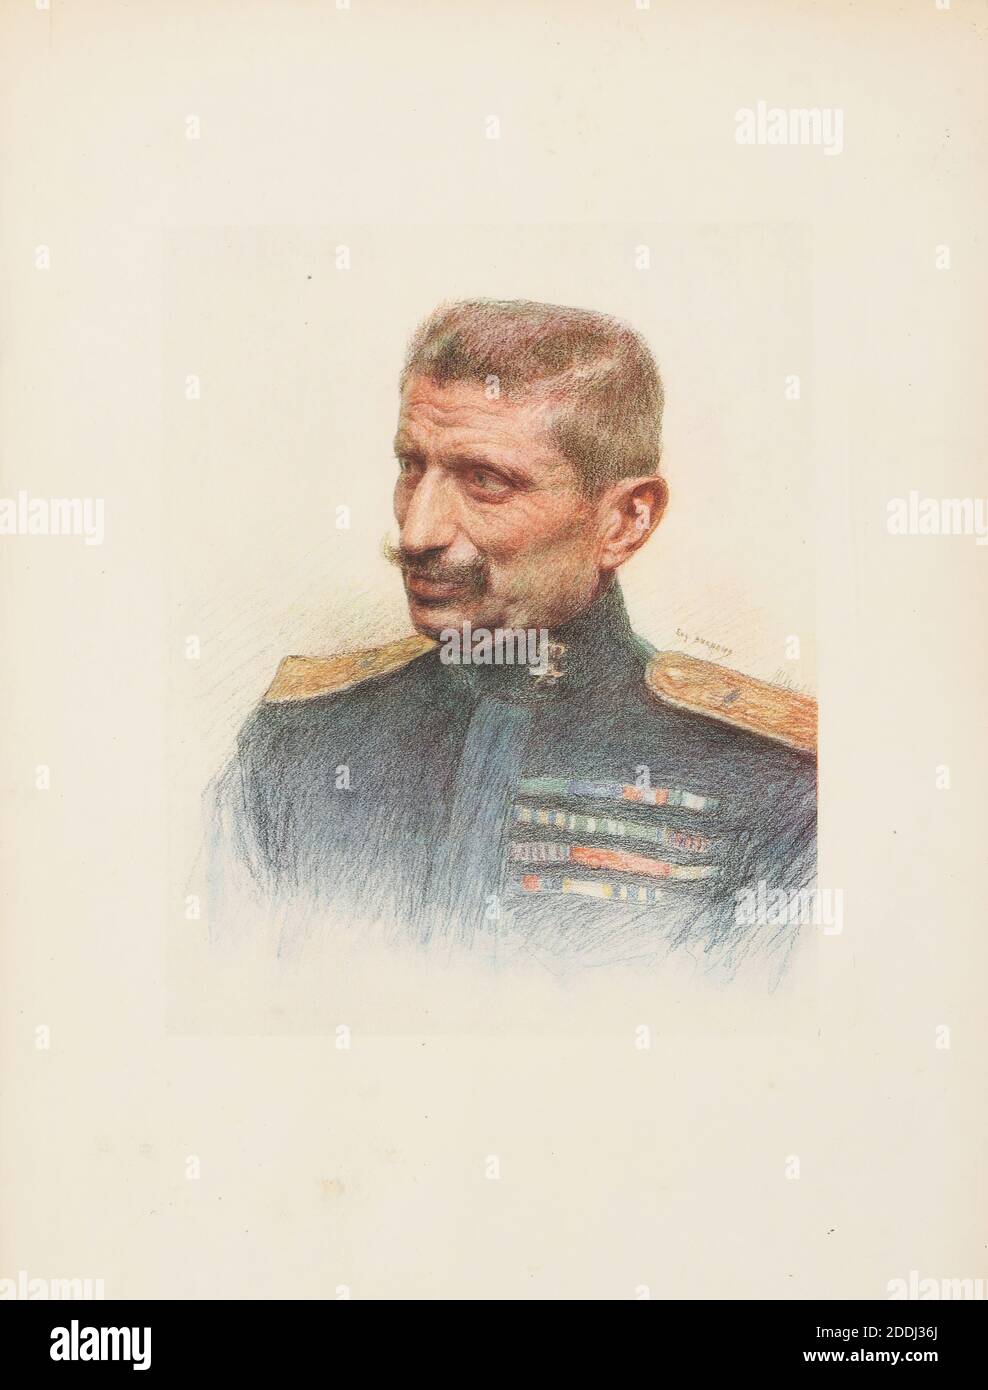 The Allies: Italy: Rear Admiral Individual: Rear Admiral Grassi, Naval Attache to the Italian Embassy, Paris Eugene Burnand (d.1931), Drawing, Pastel, Paper, Portrait, Frame, Photograph, Replica, Military, War, Works on Paper Stock Photo